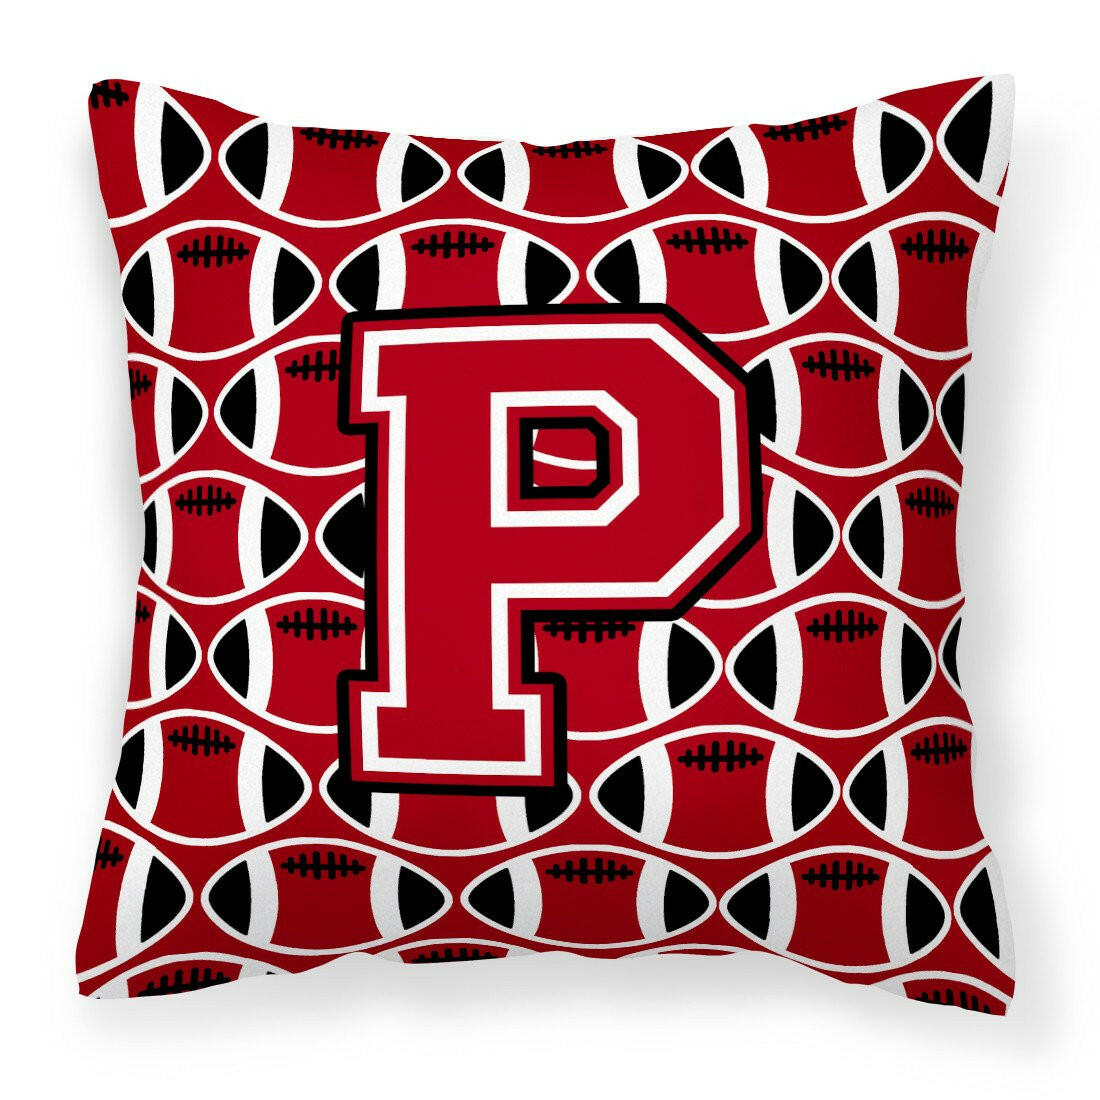 Letter P Football Red, Black and White Fabric Decorative Pillow CJ1073-PPW1414 by Caroline's Treasures